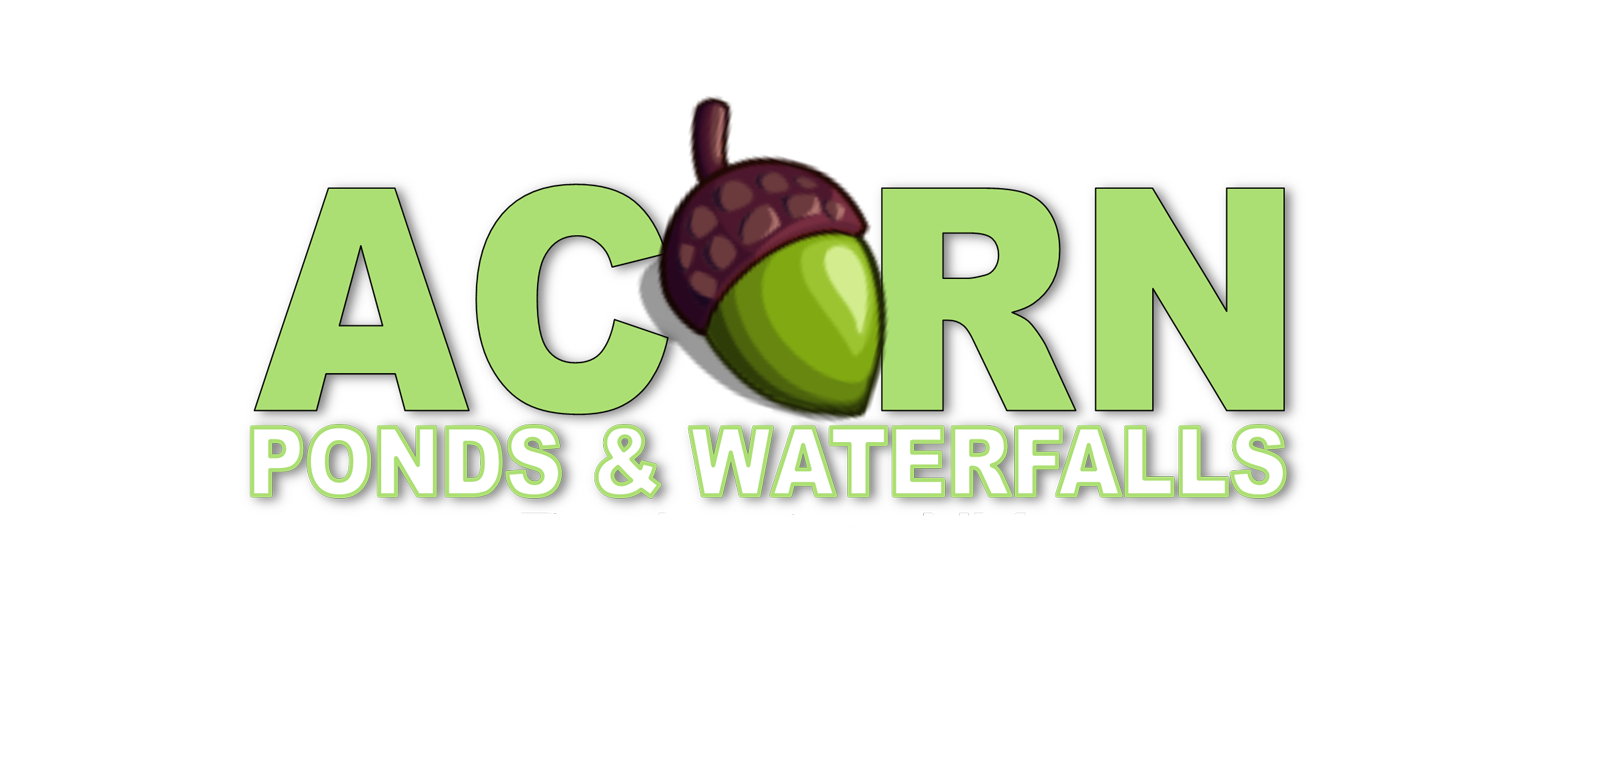 Water Feature-Pond Contractor Rochester NY - Acorn Ponds & Waterfalls